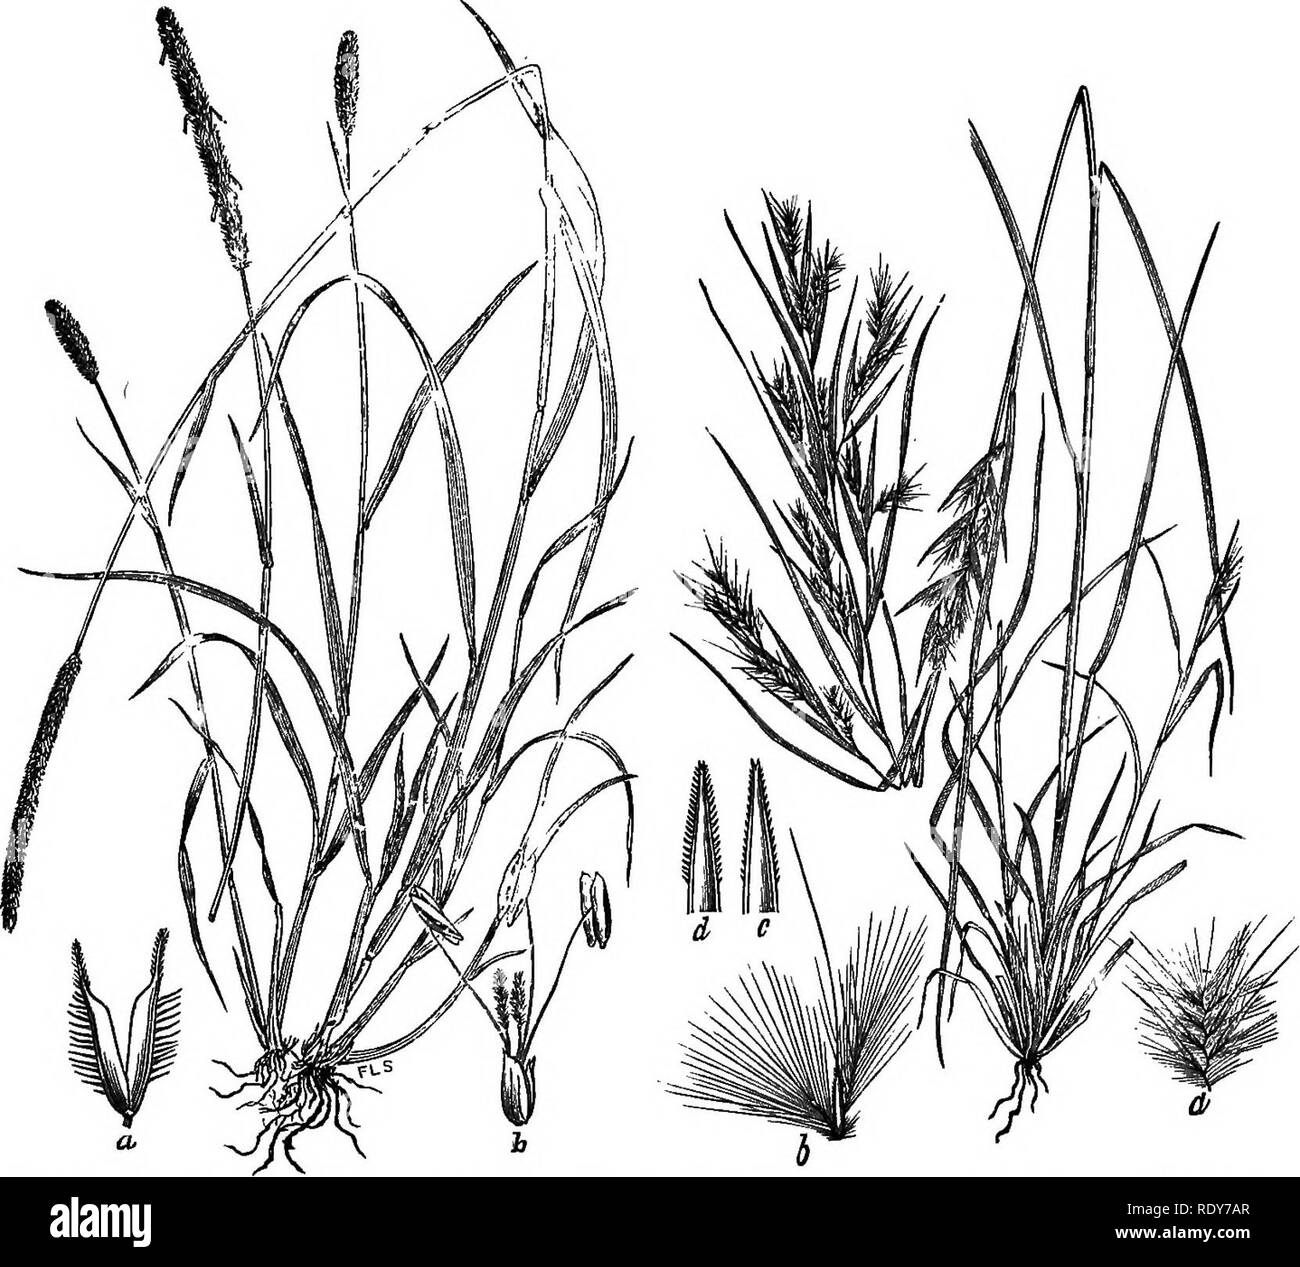 . The families of flowering plants. Plants; Phanerogams. Pig. 24.—Wild rice, Zizania aquatica. {After Britton and Brown, 111. Fl. North- ern U. S.) Fig. 25.—Minnesota Muhlenbergia (Muhlenbergia amblgua). (After Britton and Brown, 111. Fl. Northern U. S.). Wlo. 26.—Tlmoths grass (Phleum pratense). (After Via. S7.—Broom grass, Andropogon Virginicus. Soribner, Bull. No. 7, Div. of Agrost., TT. S. Dept. of (After Soribner, Bull. No. 7, DiT. of Agrost., U. Agric.) S. Dept. of Agrio.). Please note that these images are extracted from scanned page images that may have been digitally enhanced for read Stock Photo